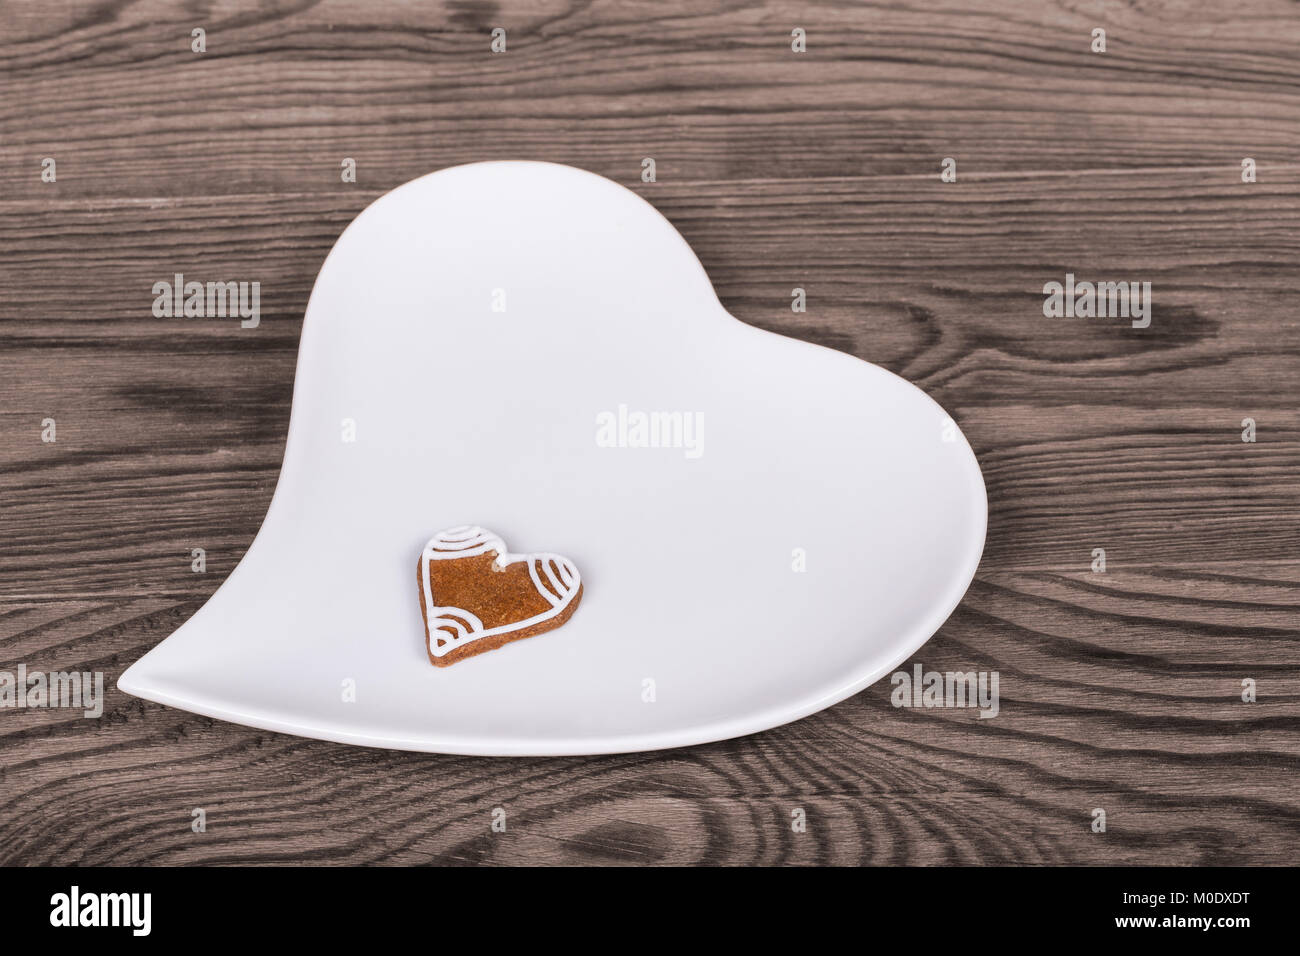 Valentine's hearts for good luck, hand-decorated gingerbread and white plate. Symbols of love, bond, marriage or friendship on a brown wood background. Stock Photo